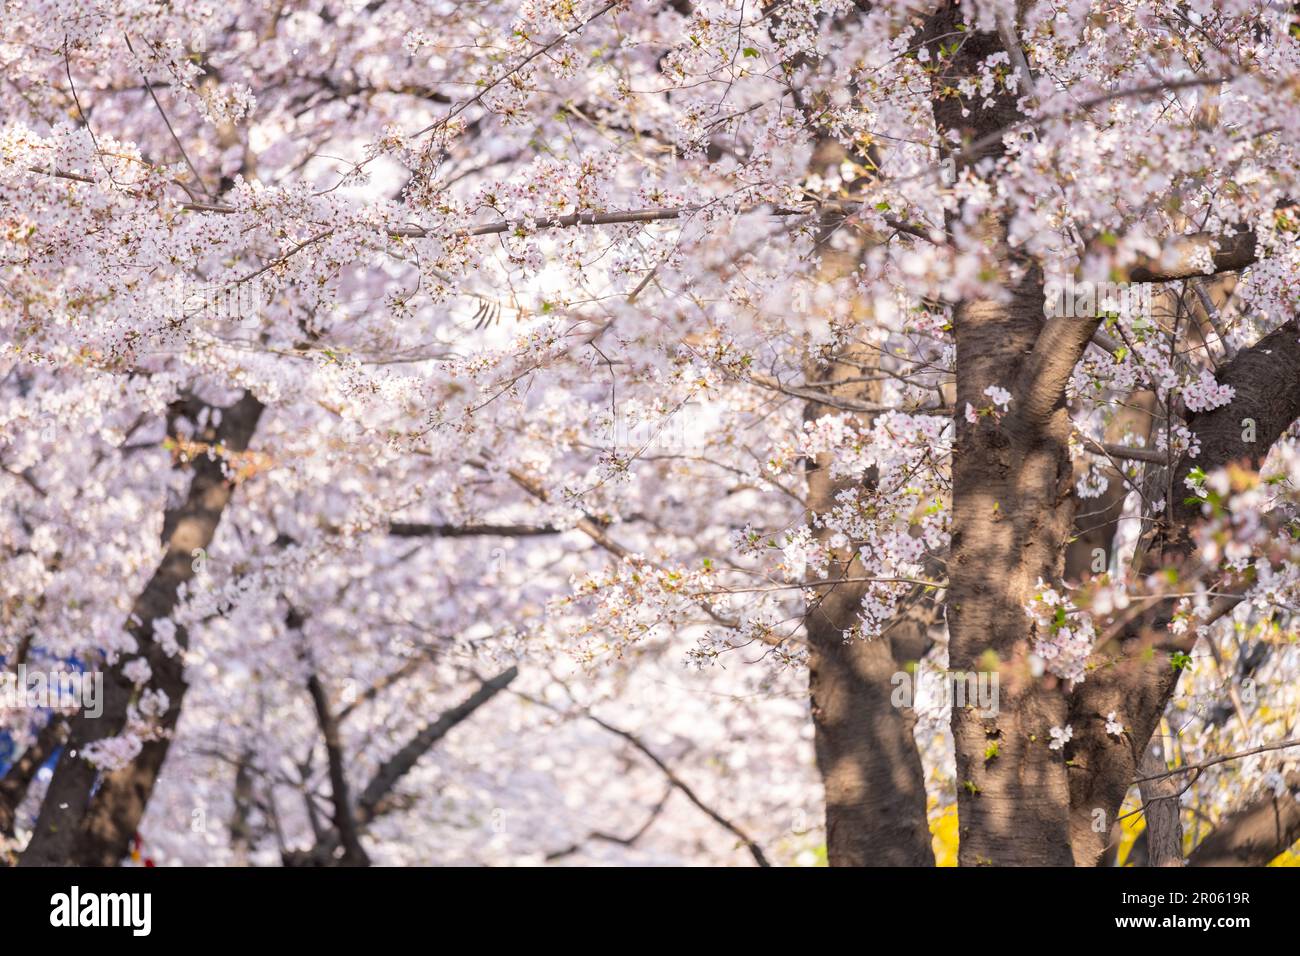 Cherry Blossoms in spring with Soft focus, at Yeongdeungpo Yeouido Spring Flower Festival in Seoul, South Korea Stock Photo